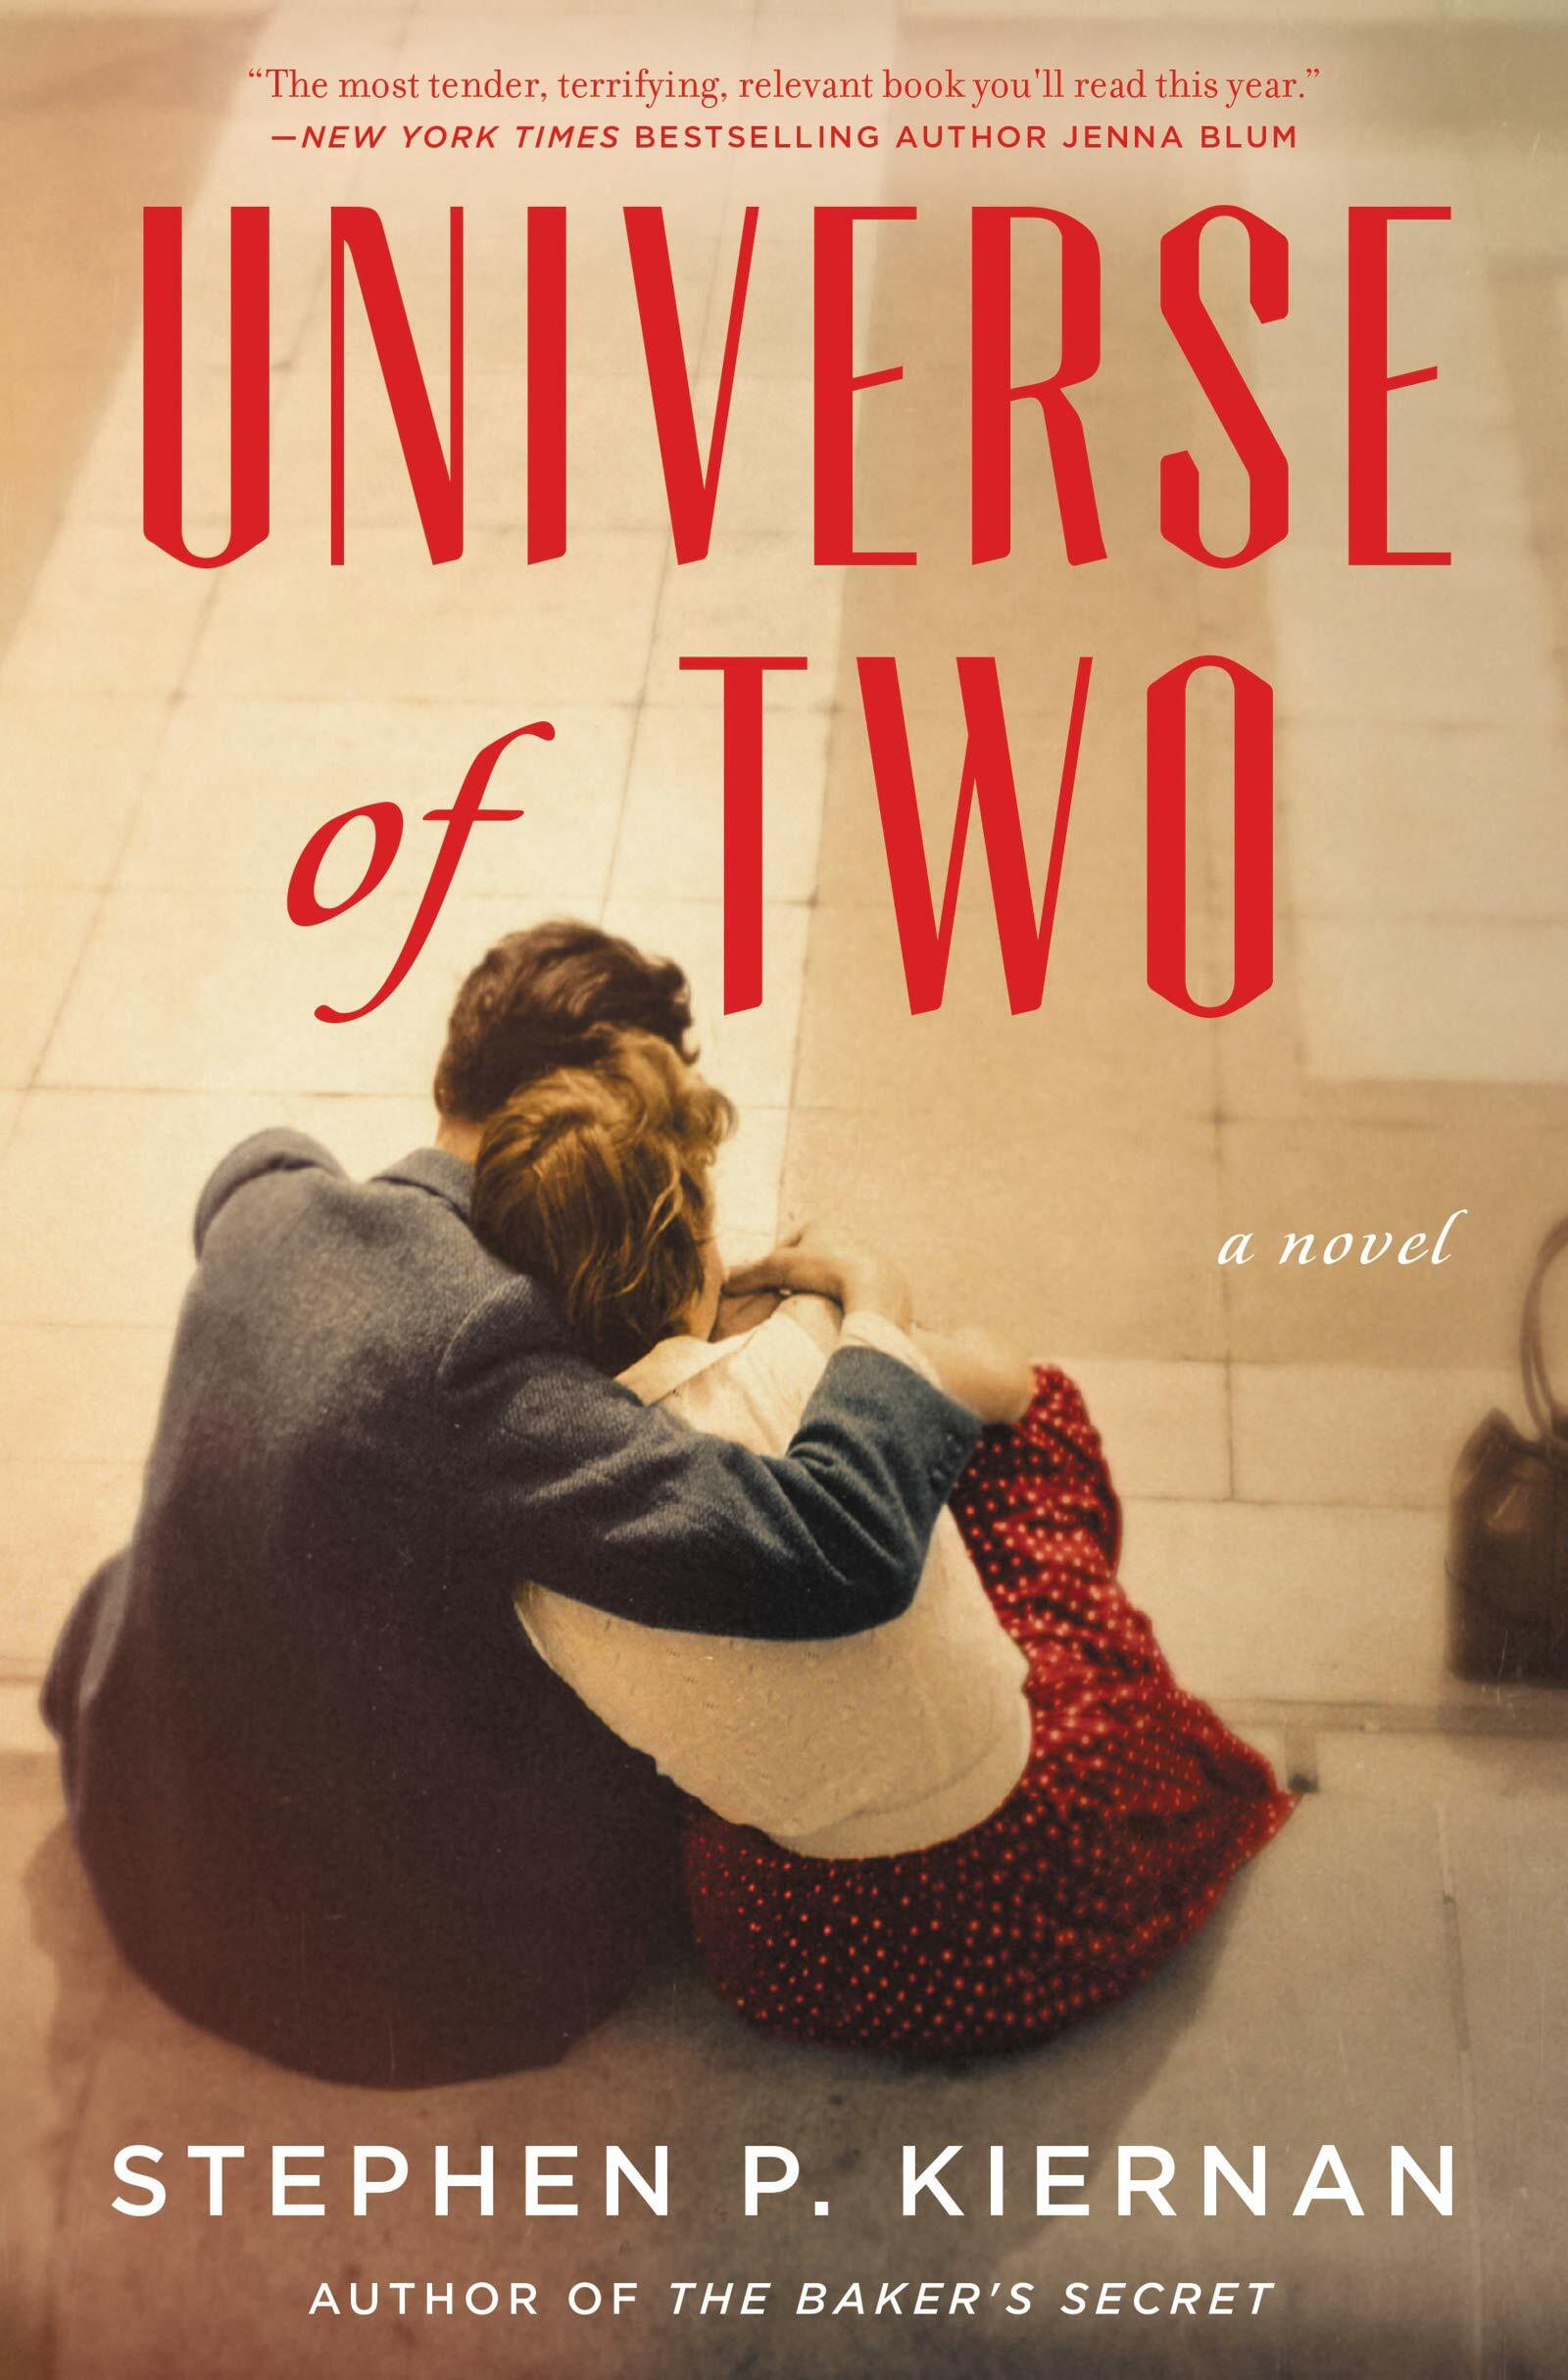 Universe of Two (Hardcover)